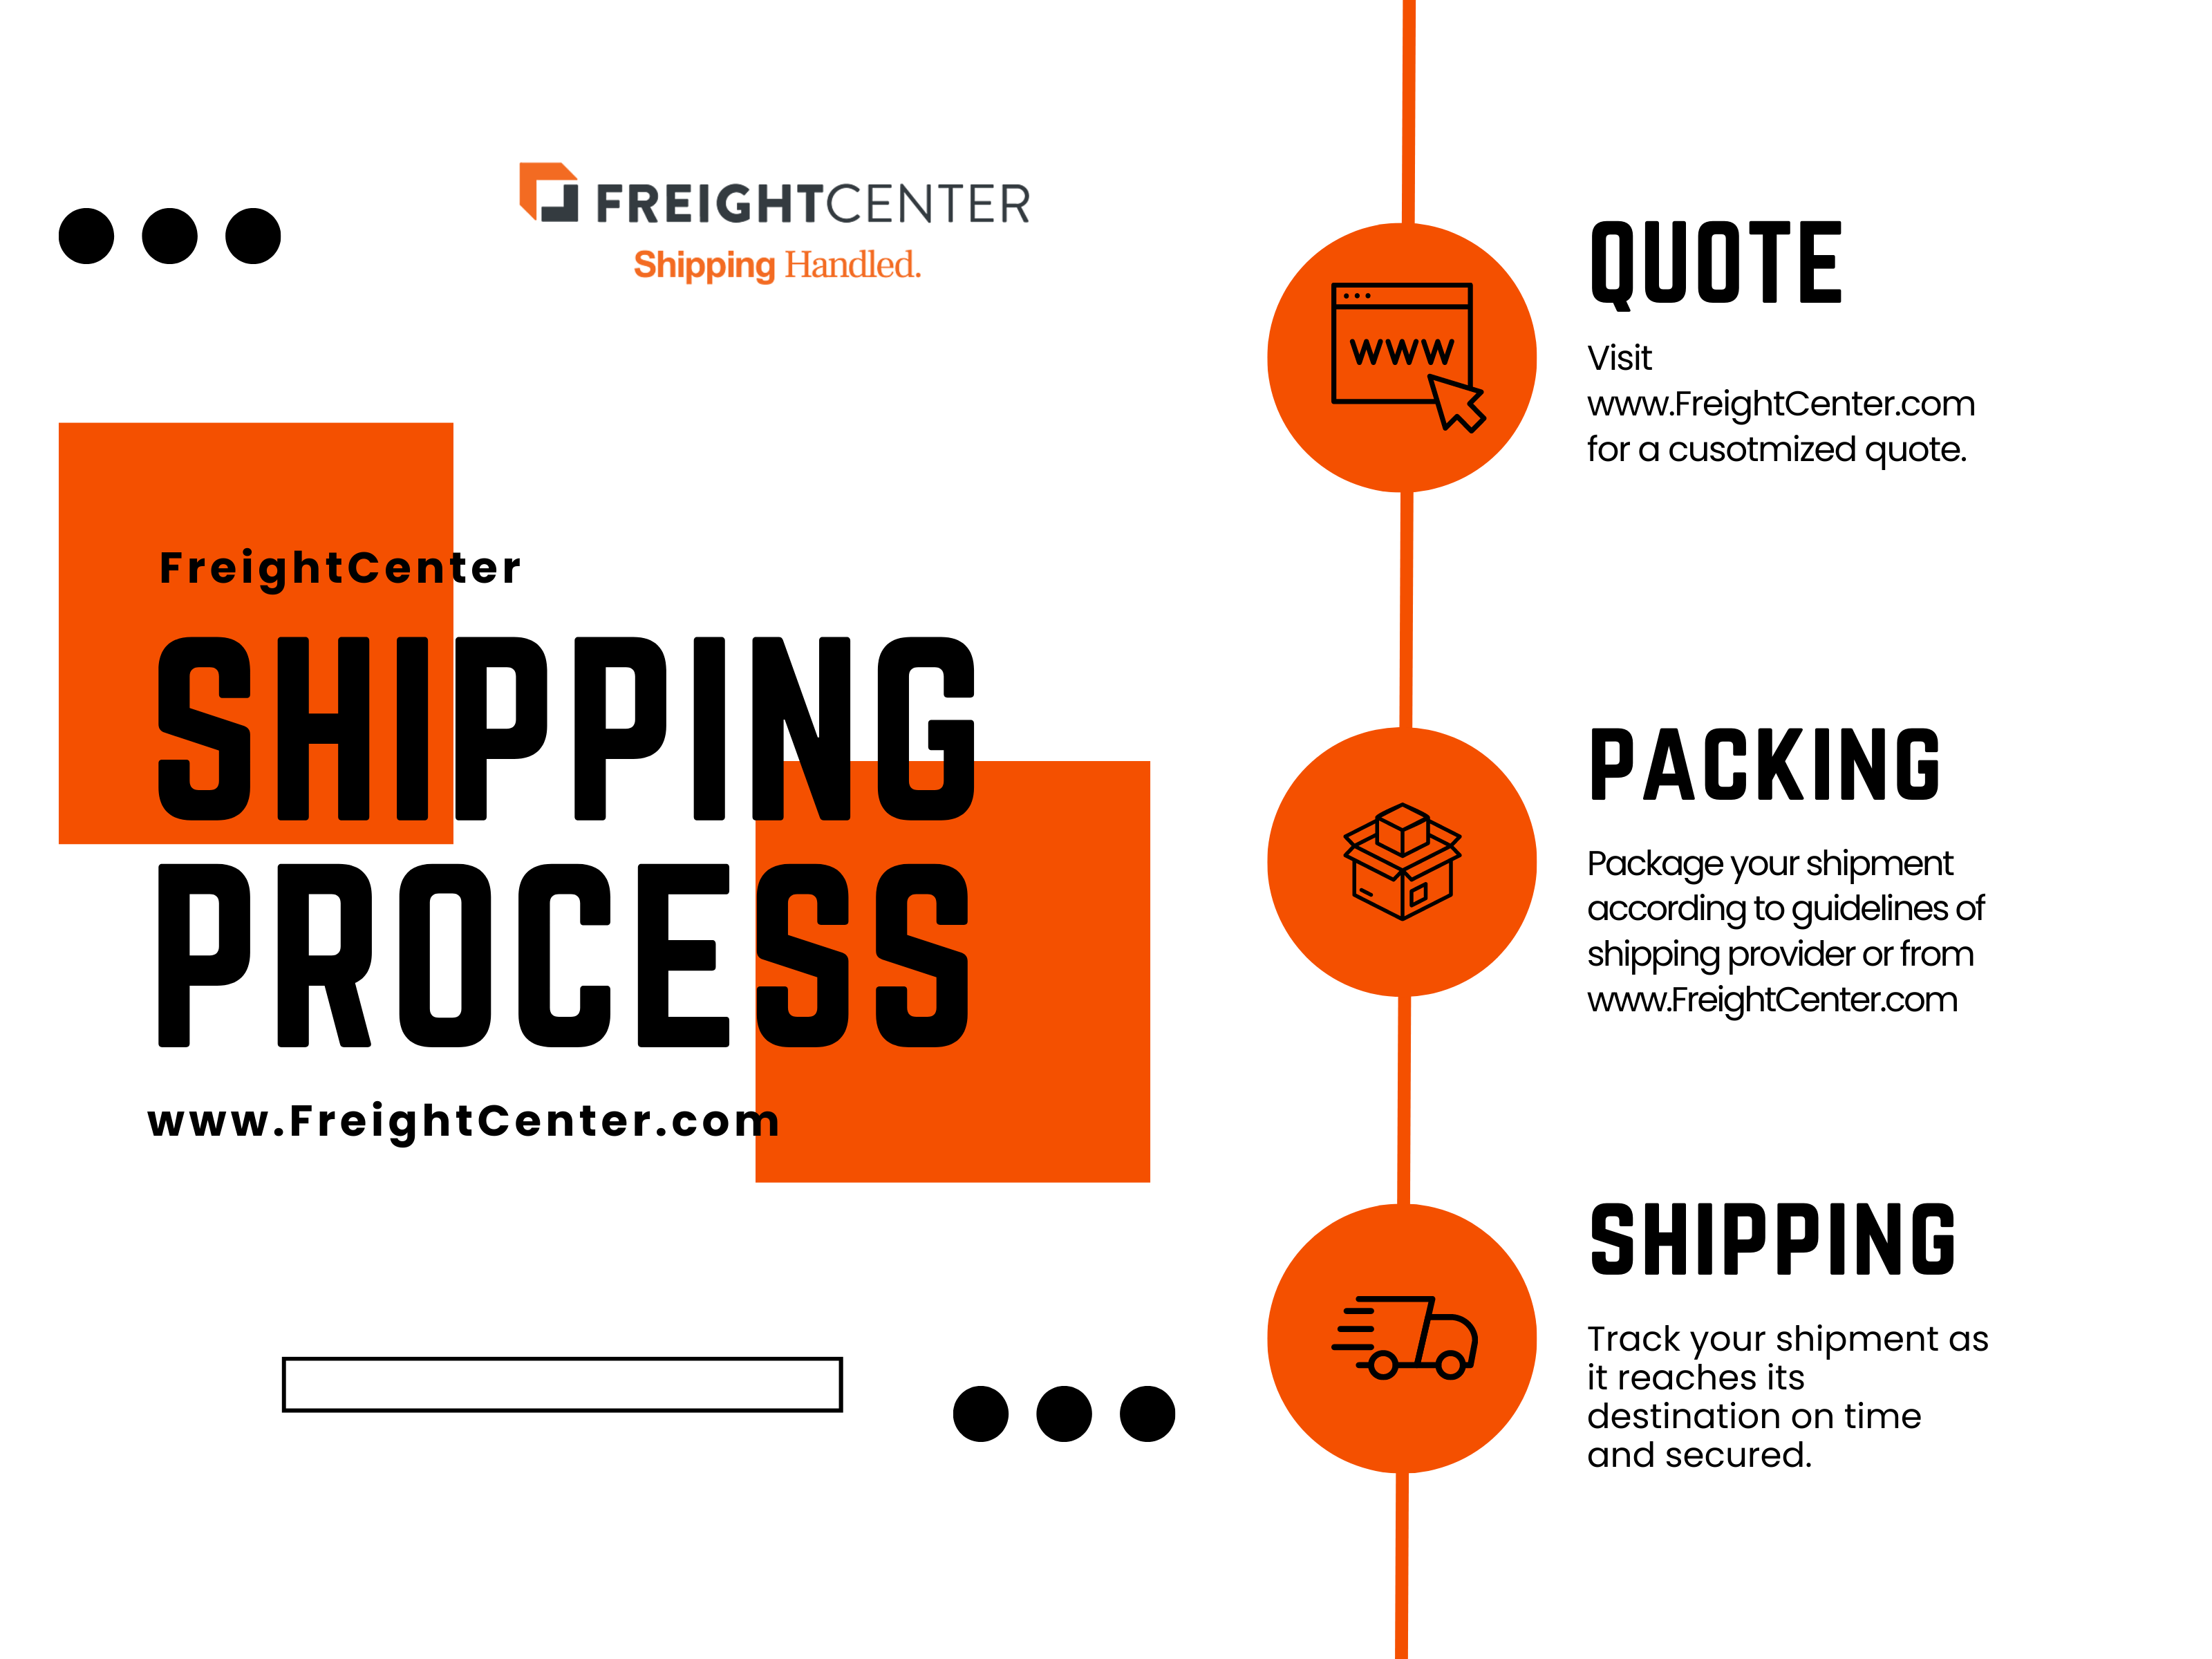 FreightCenter Shipping Process Infographic explaining Quoting, Packing, and Shipping